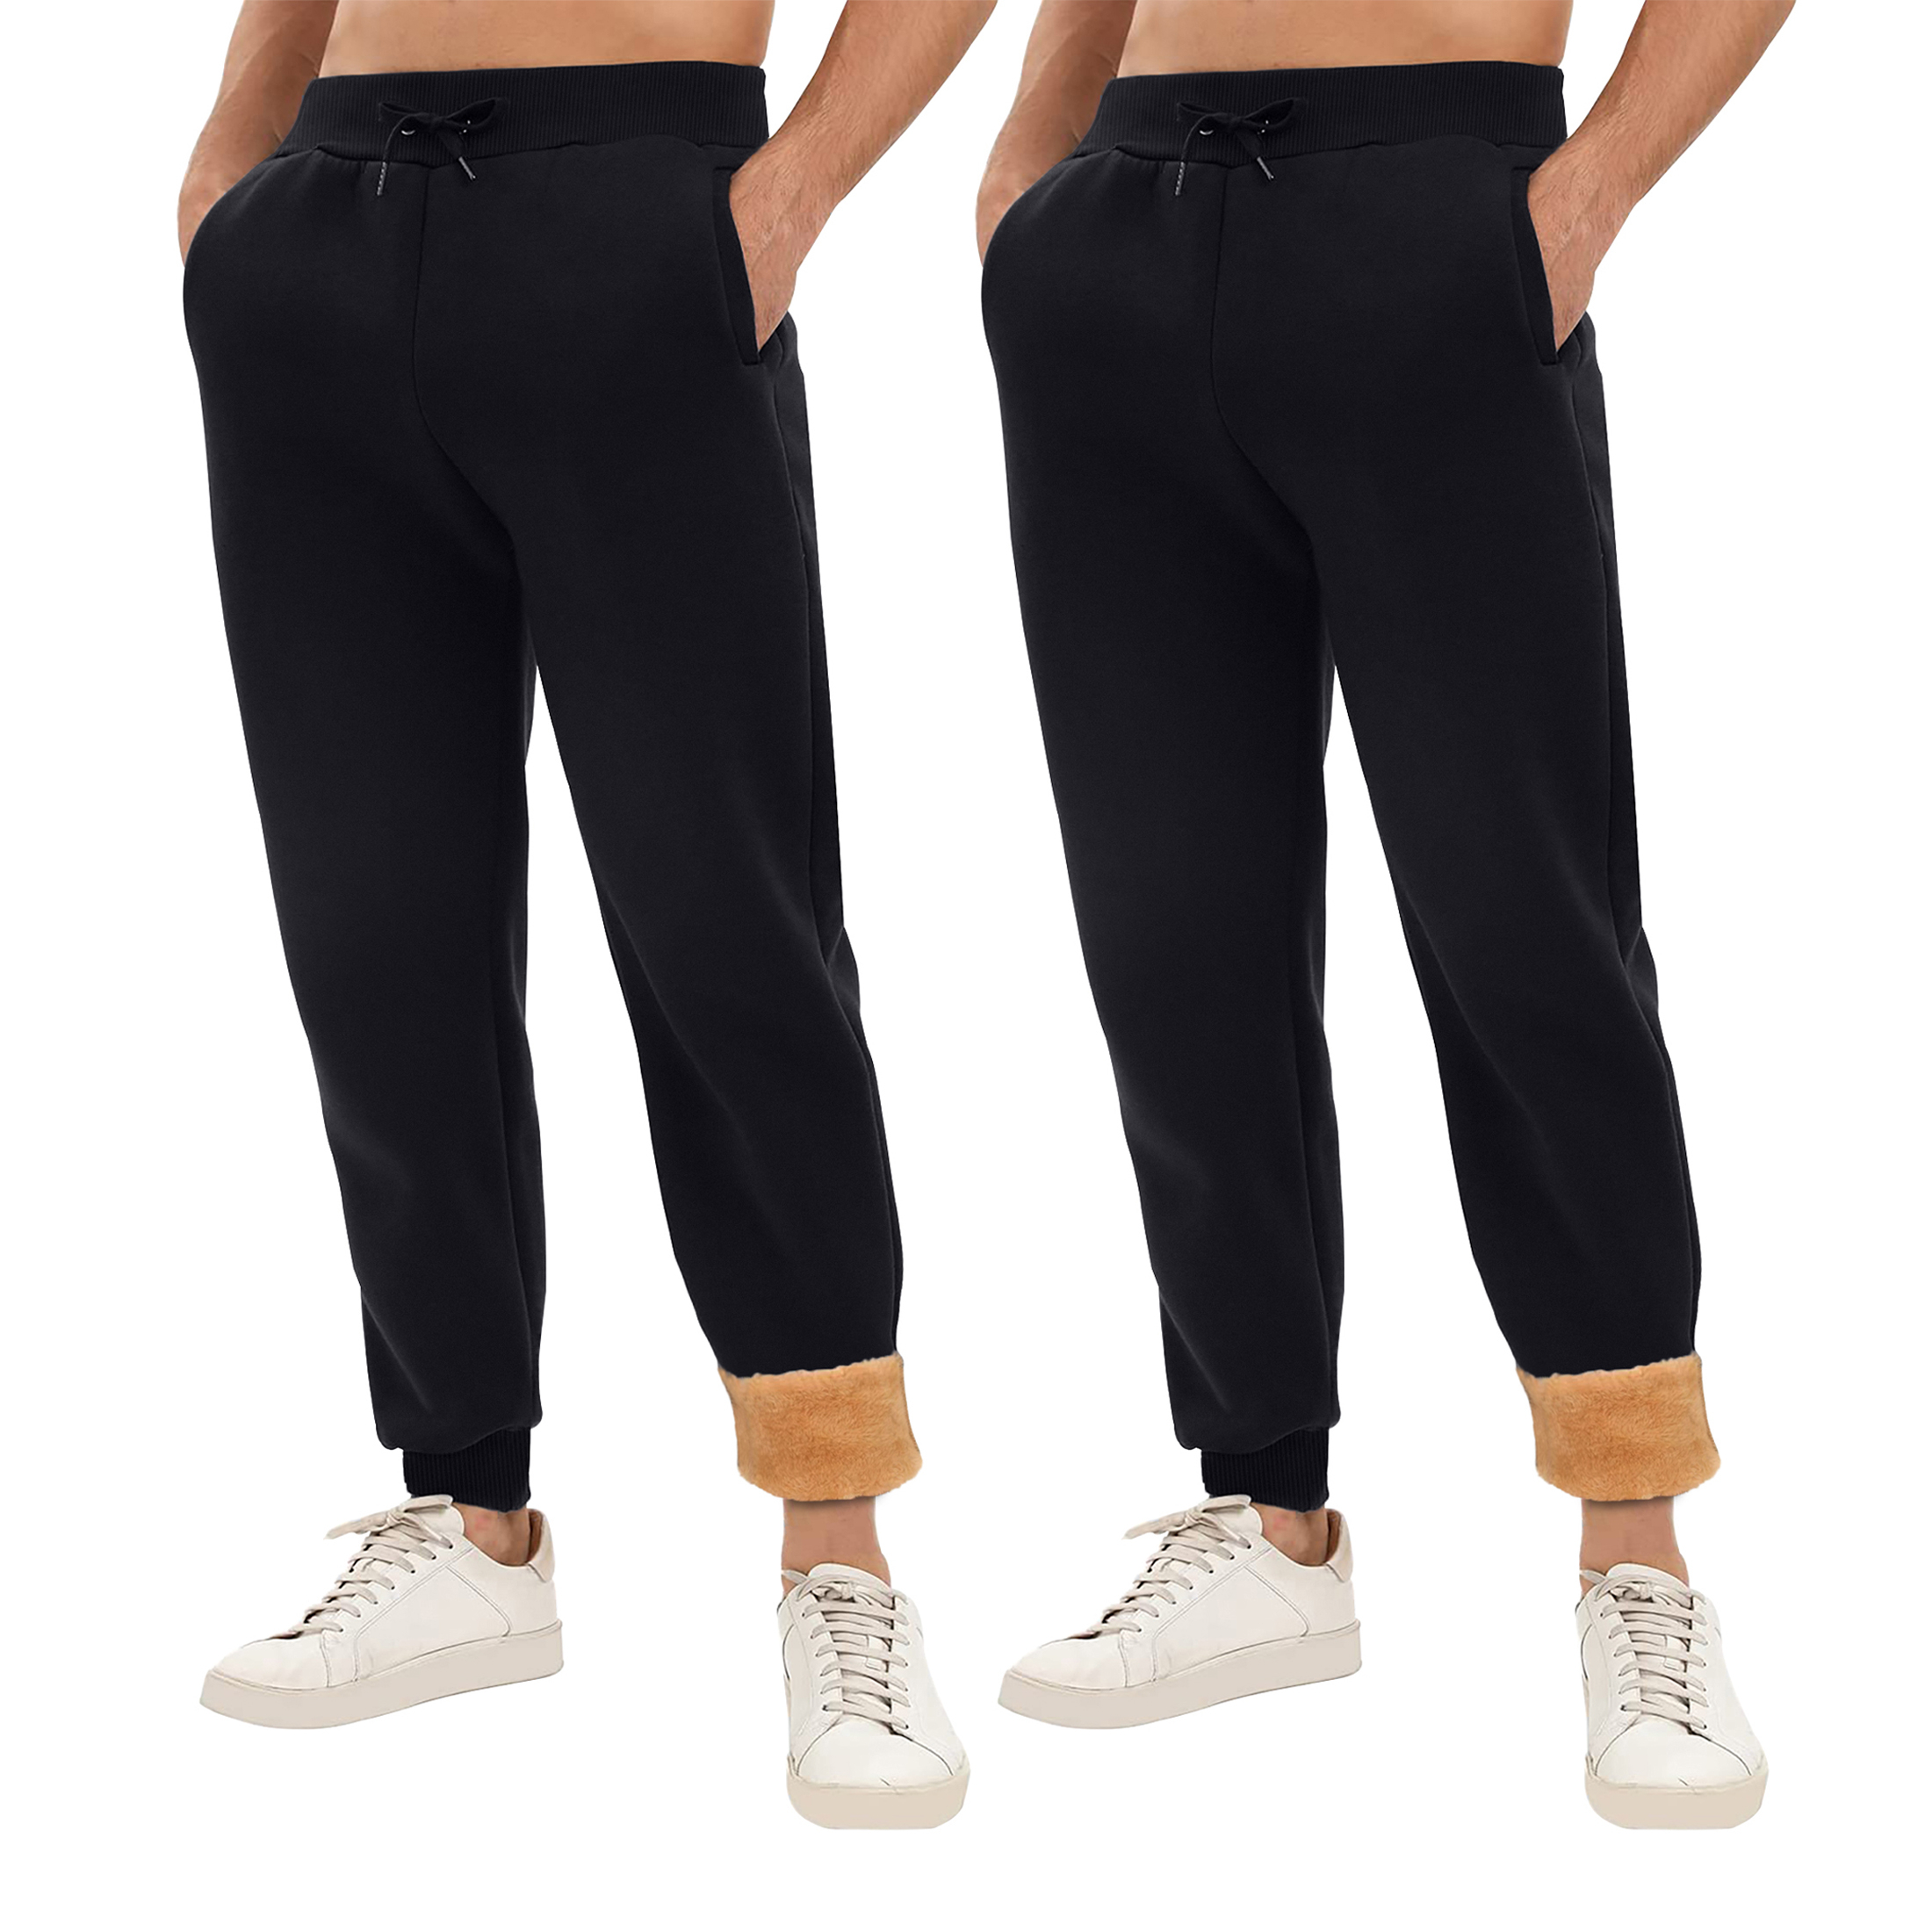 2-Pack: Men's Winter Warm Thick Sherpa Lined Jogger Track Pants With Pockets - Black, Small